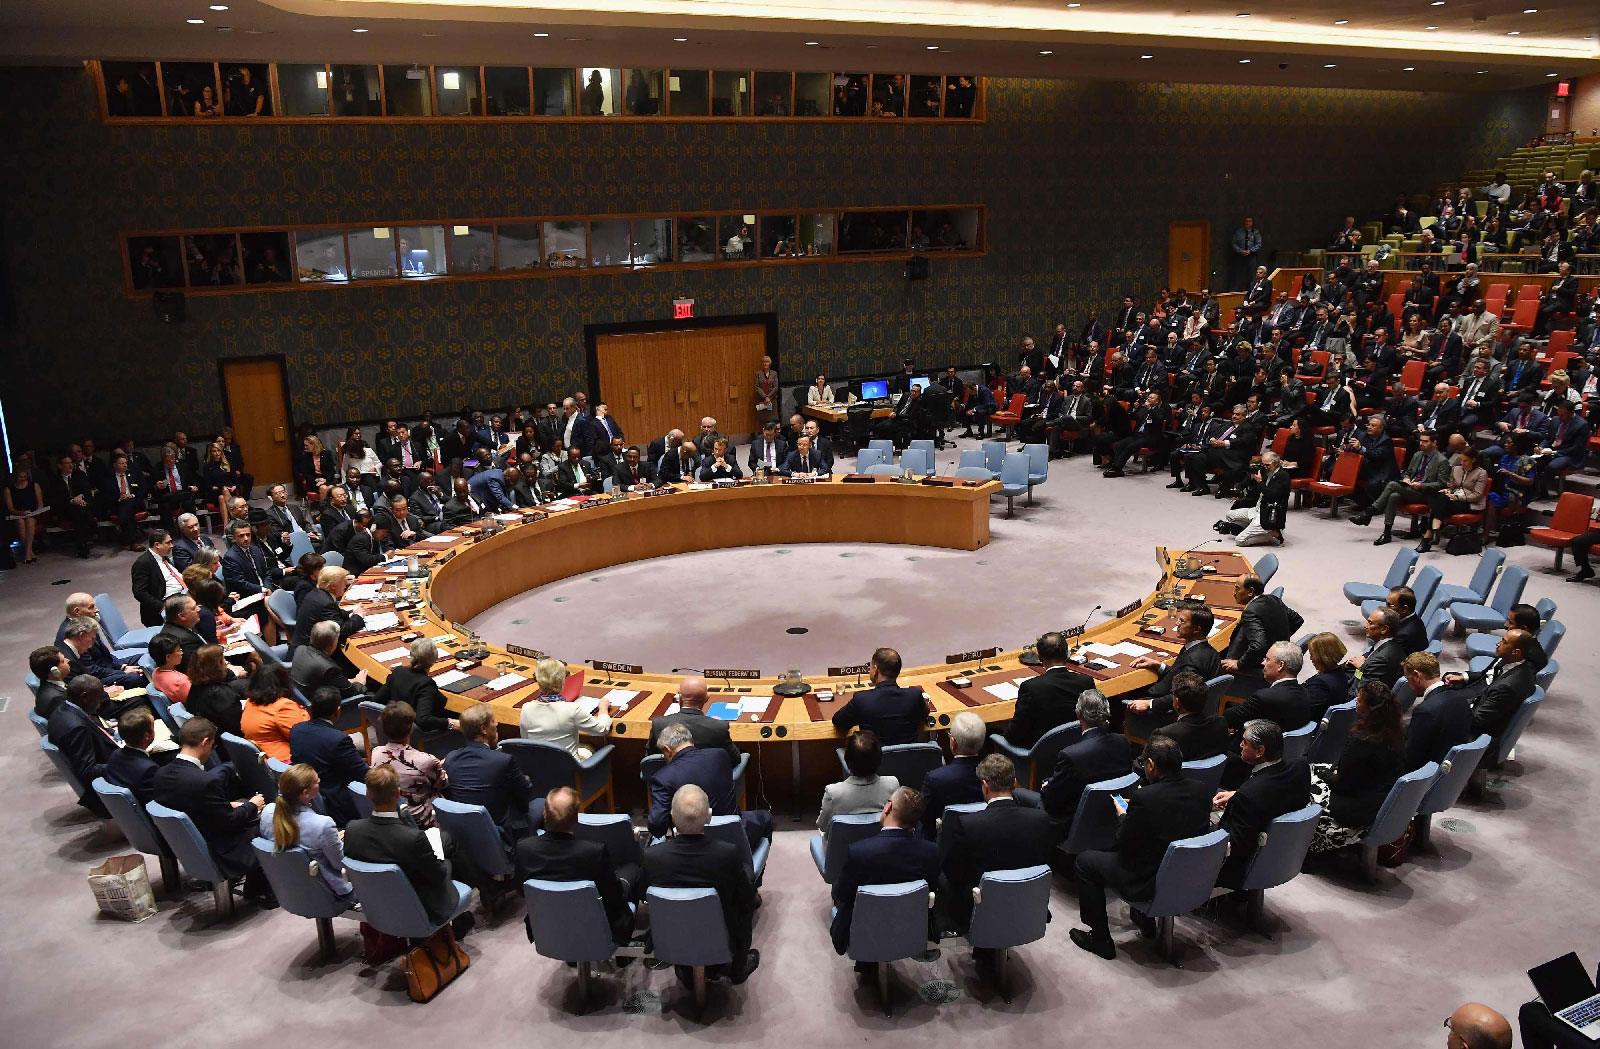 The UN Security Council meets in New York.